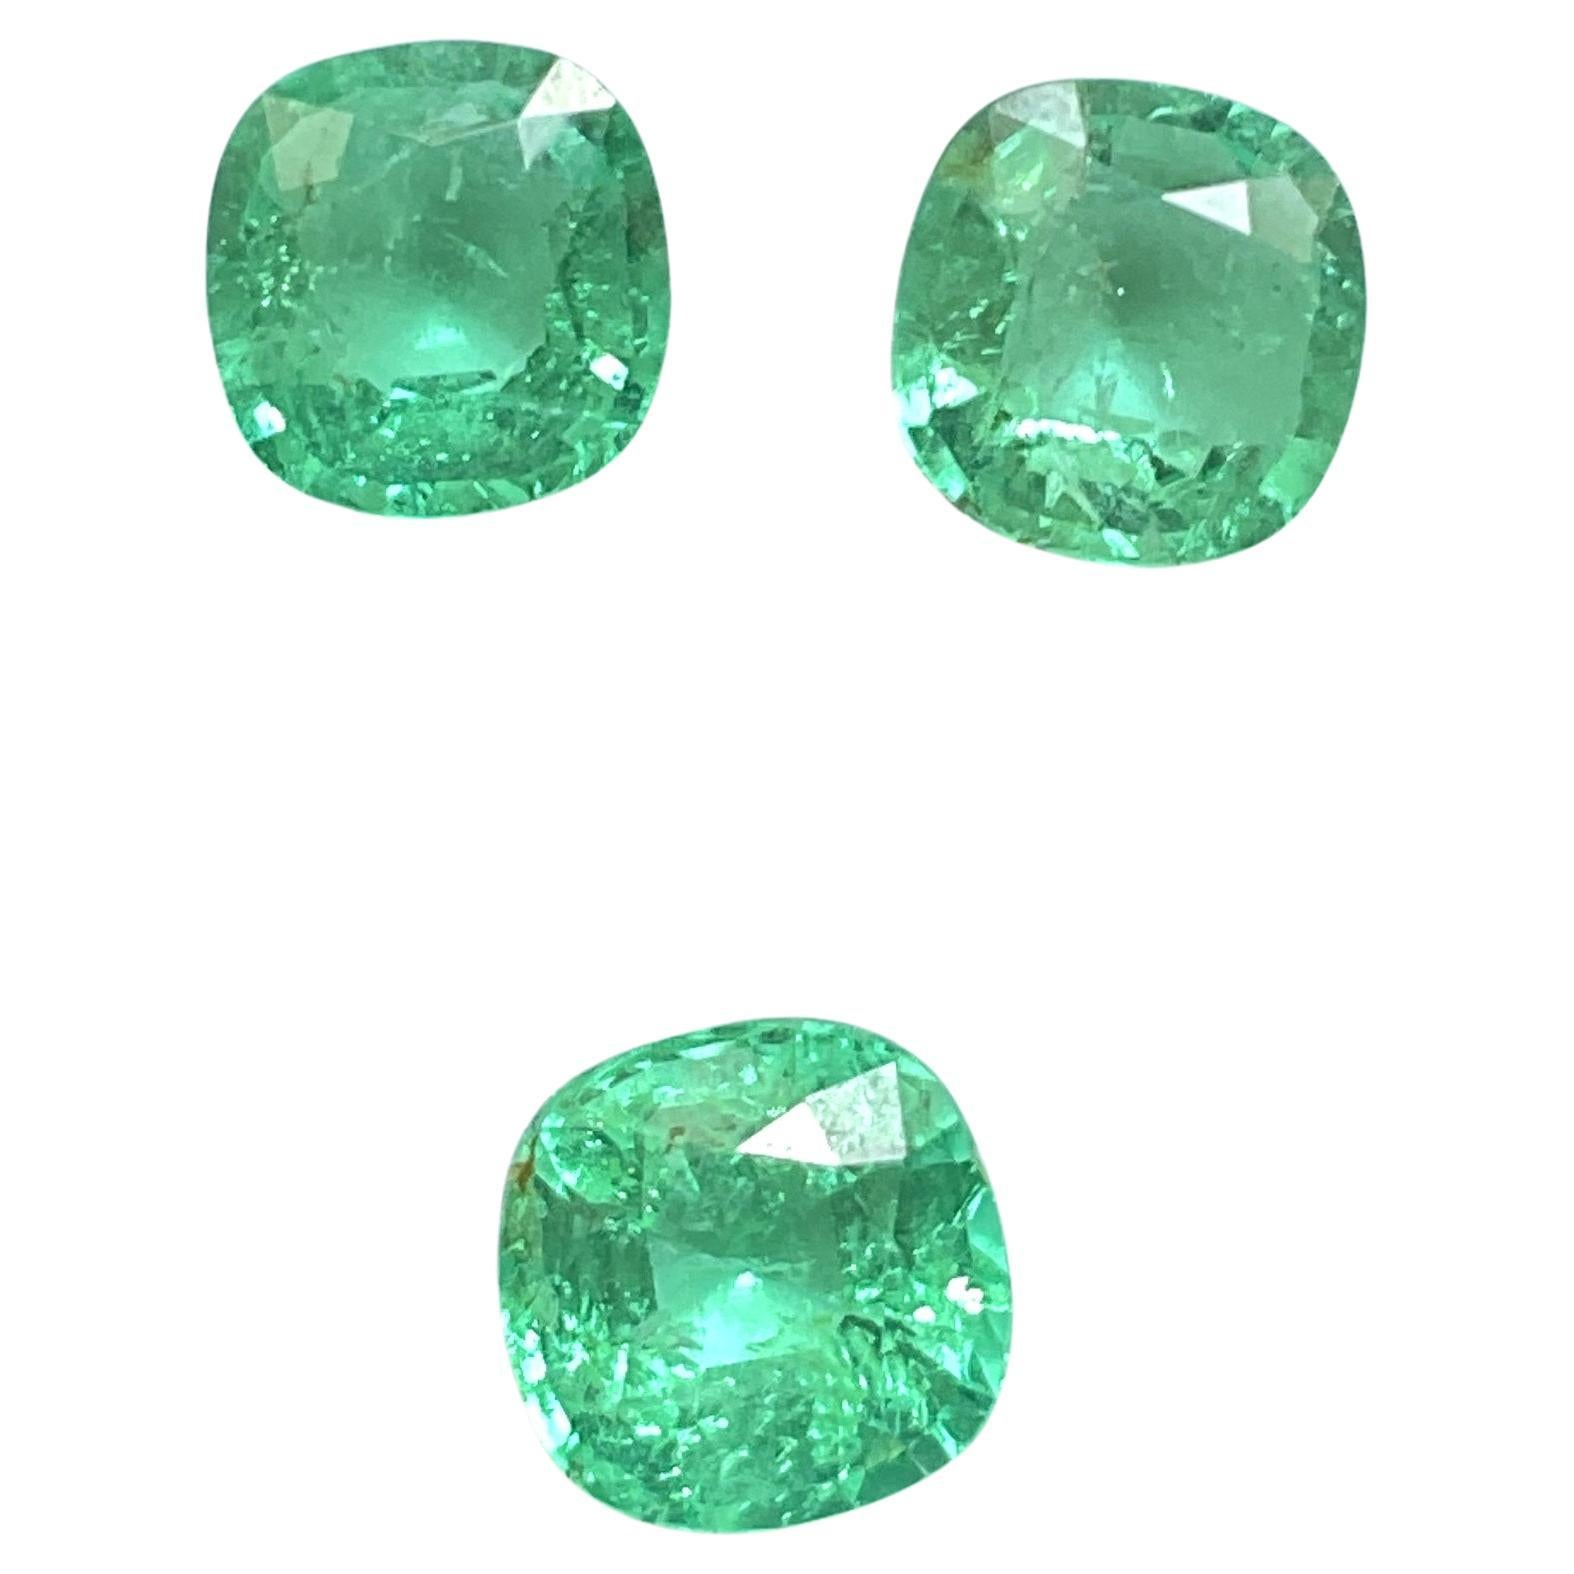 certified 10.35 carats colombian emerald cushion 3 pieces cut stone set gemstone For Sale